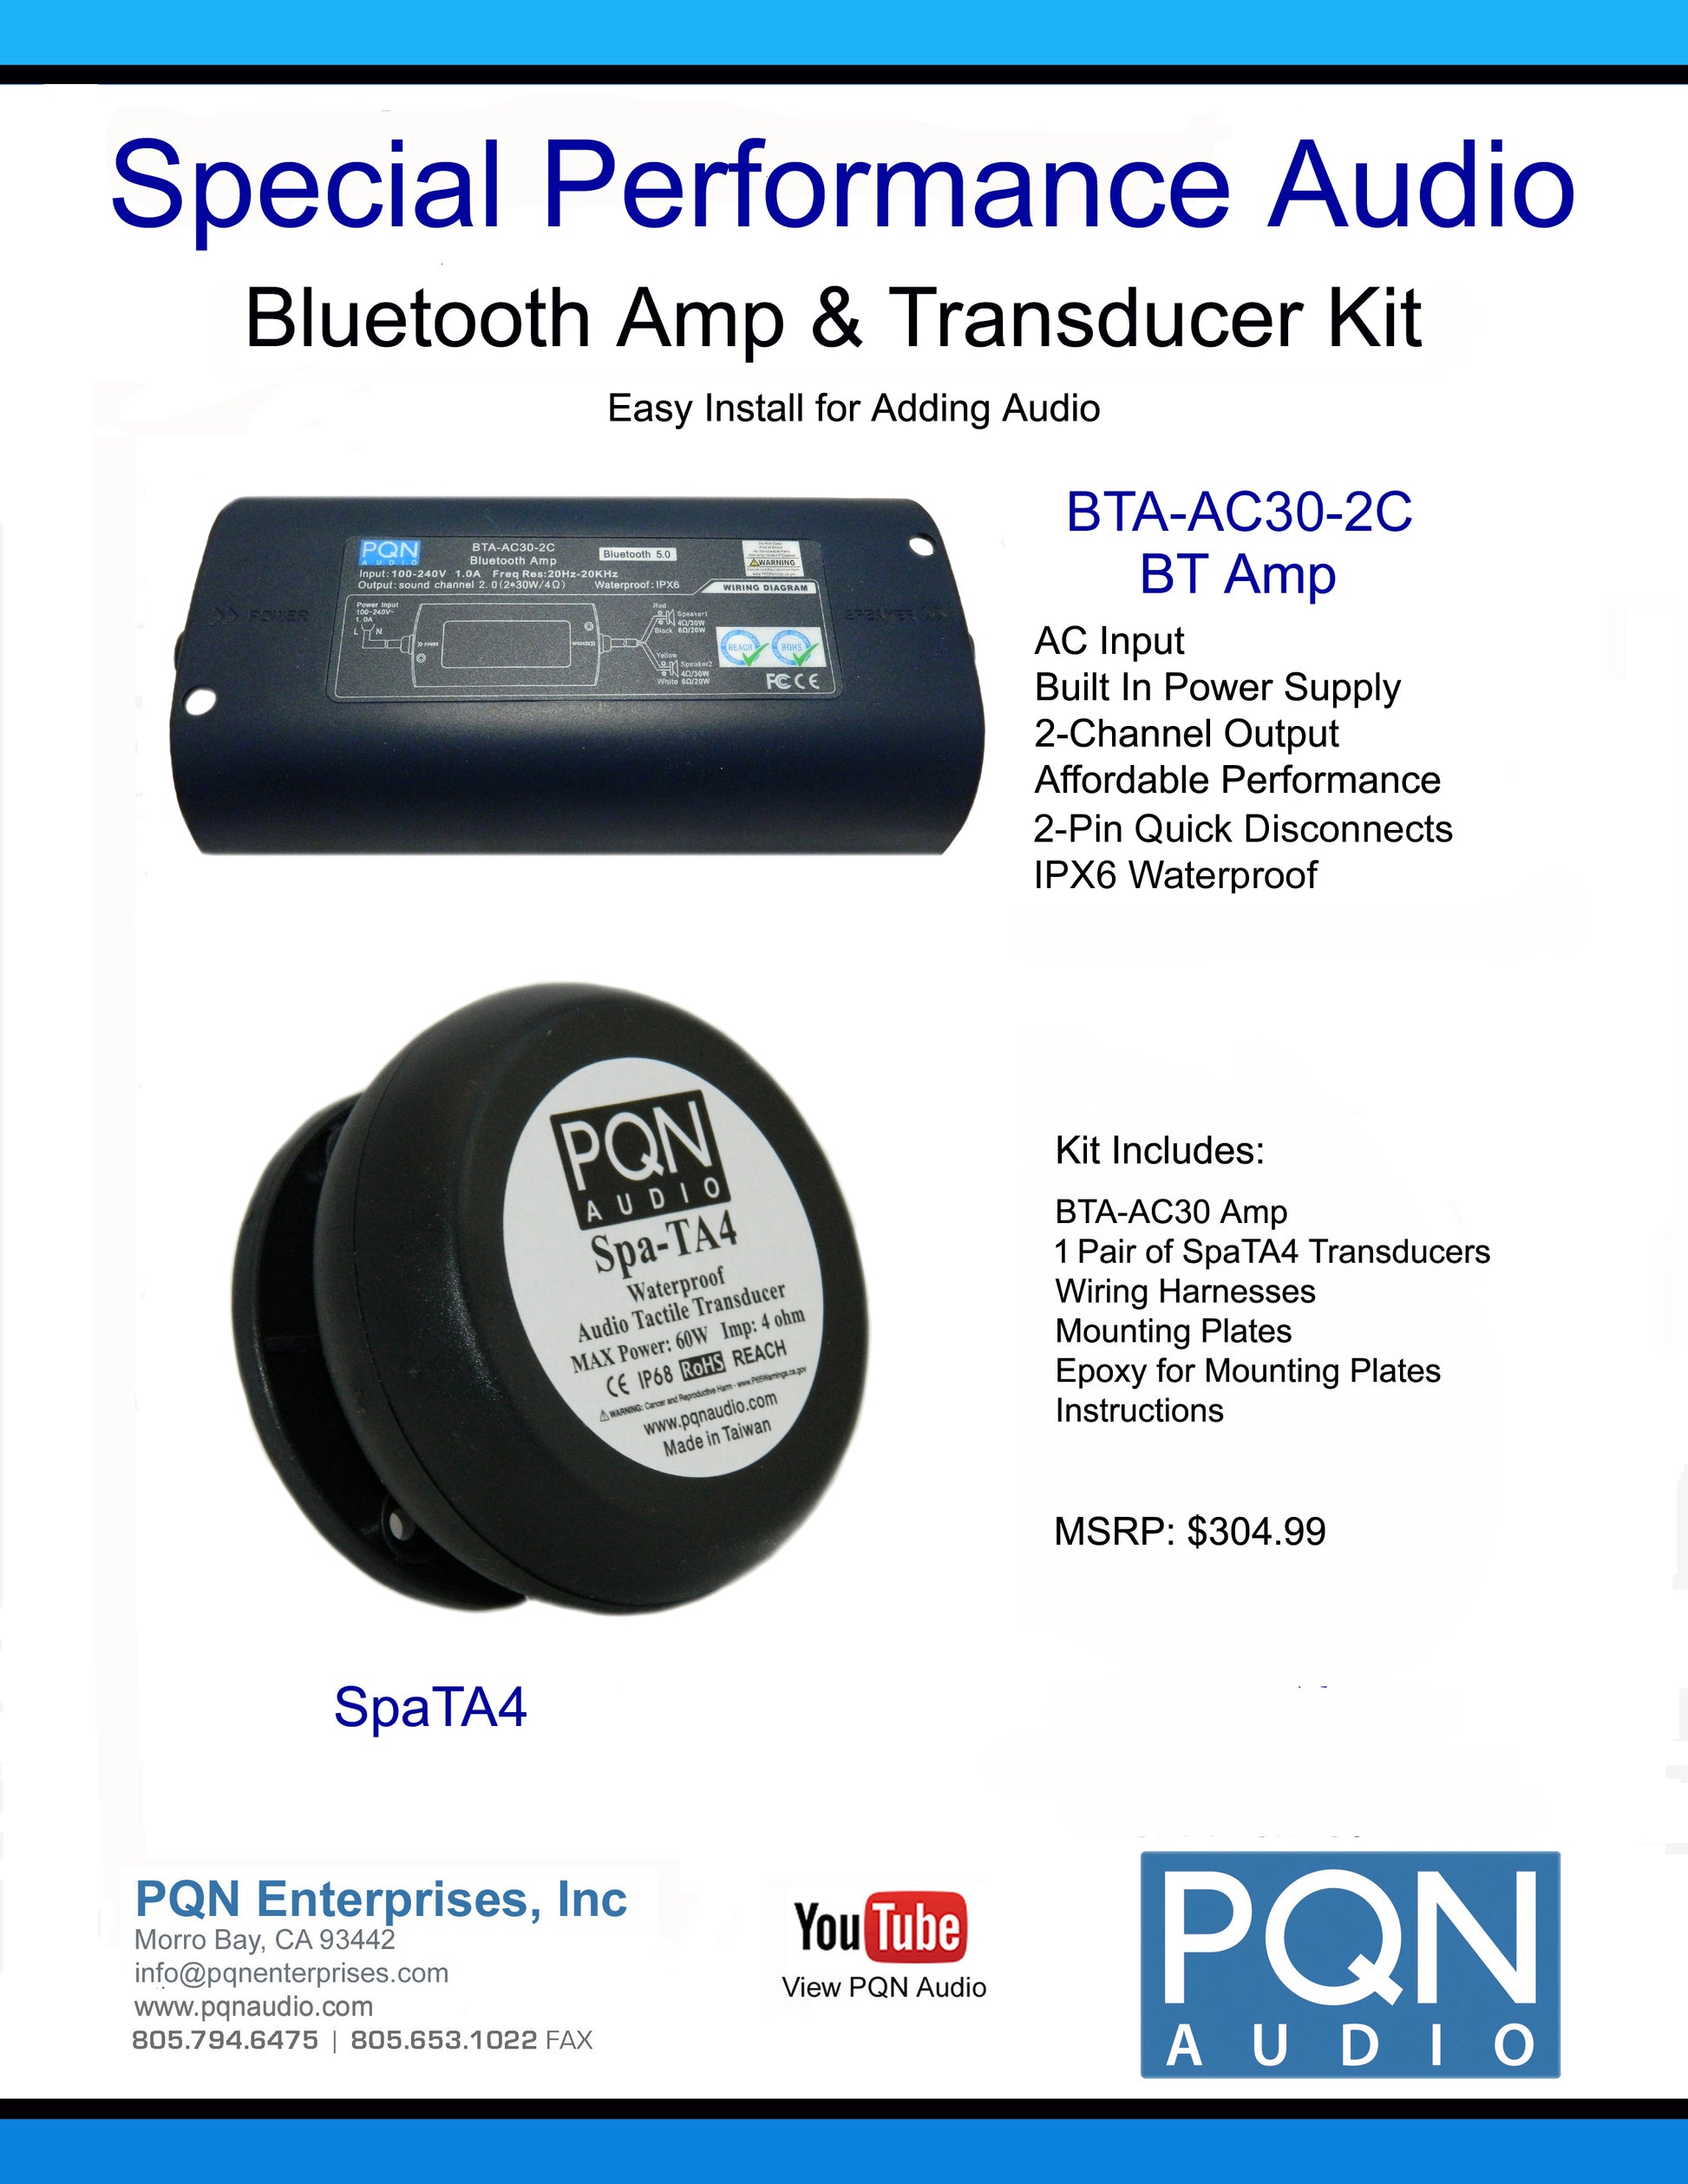 Get the amplifier and transducer kit and save!